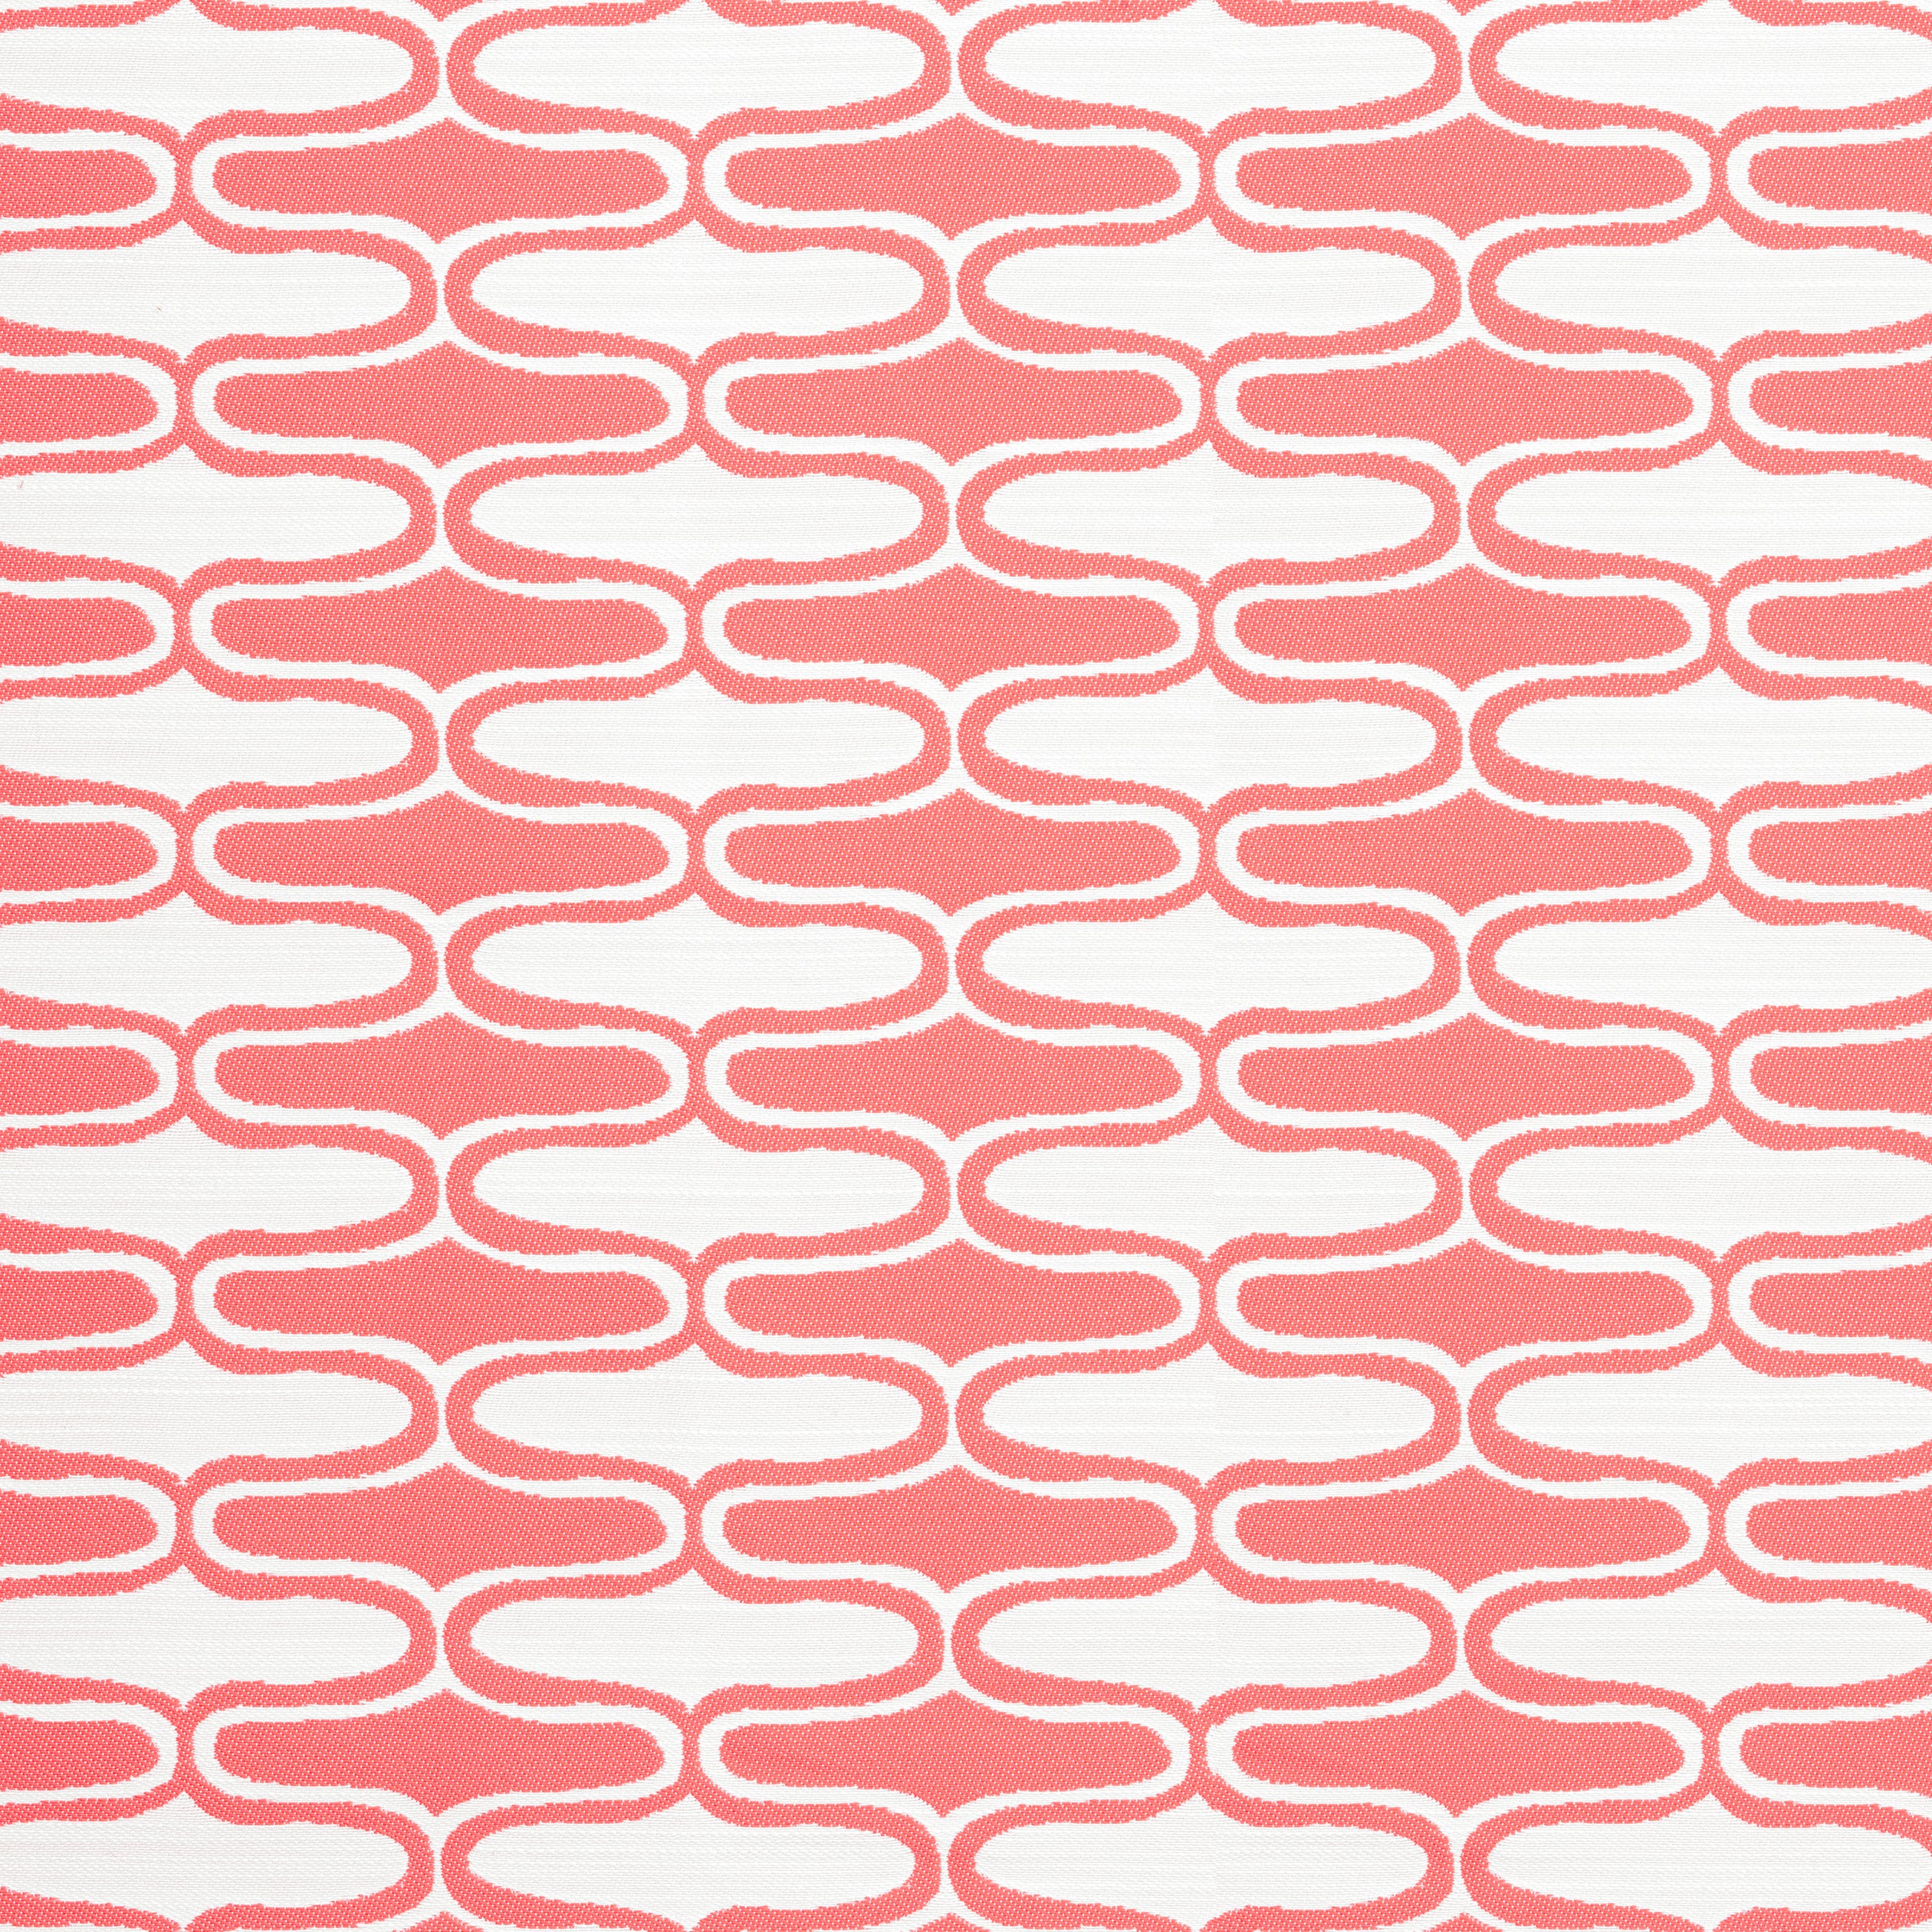 Saraband fabric in coral color - pattern number W8532 - by Thibaut in the Villa collection